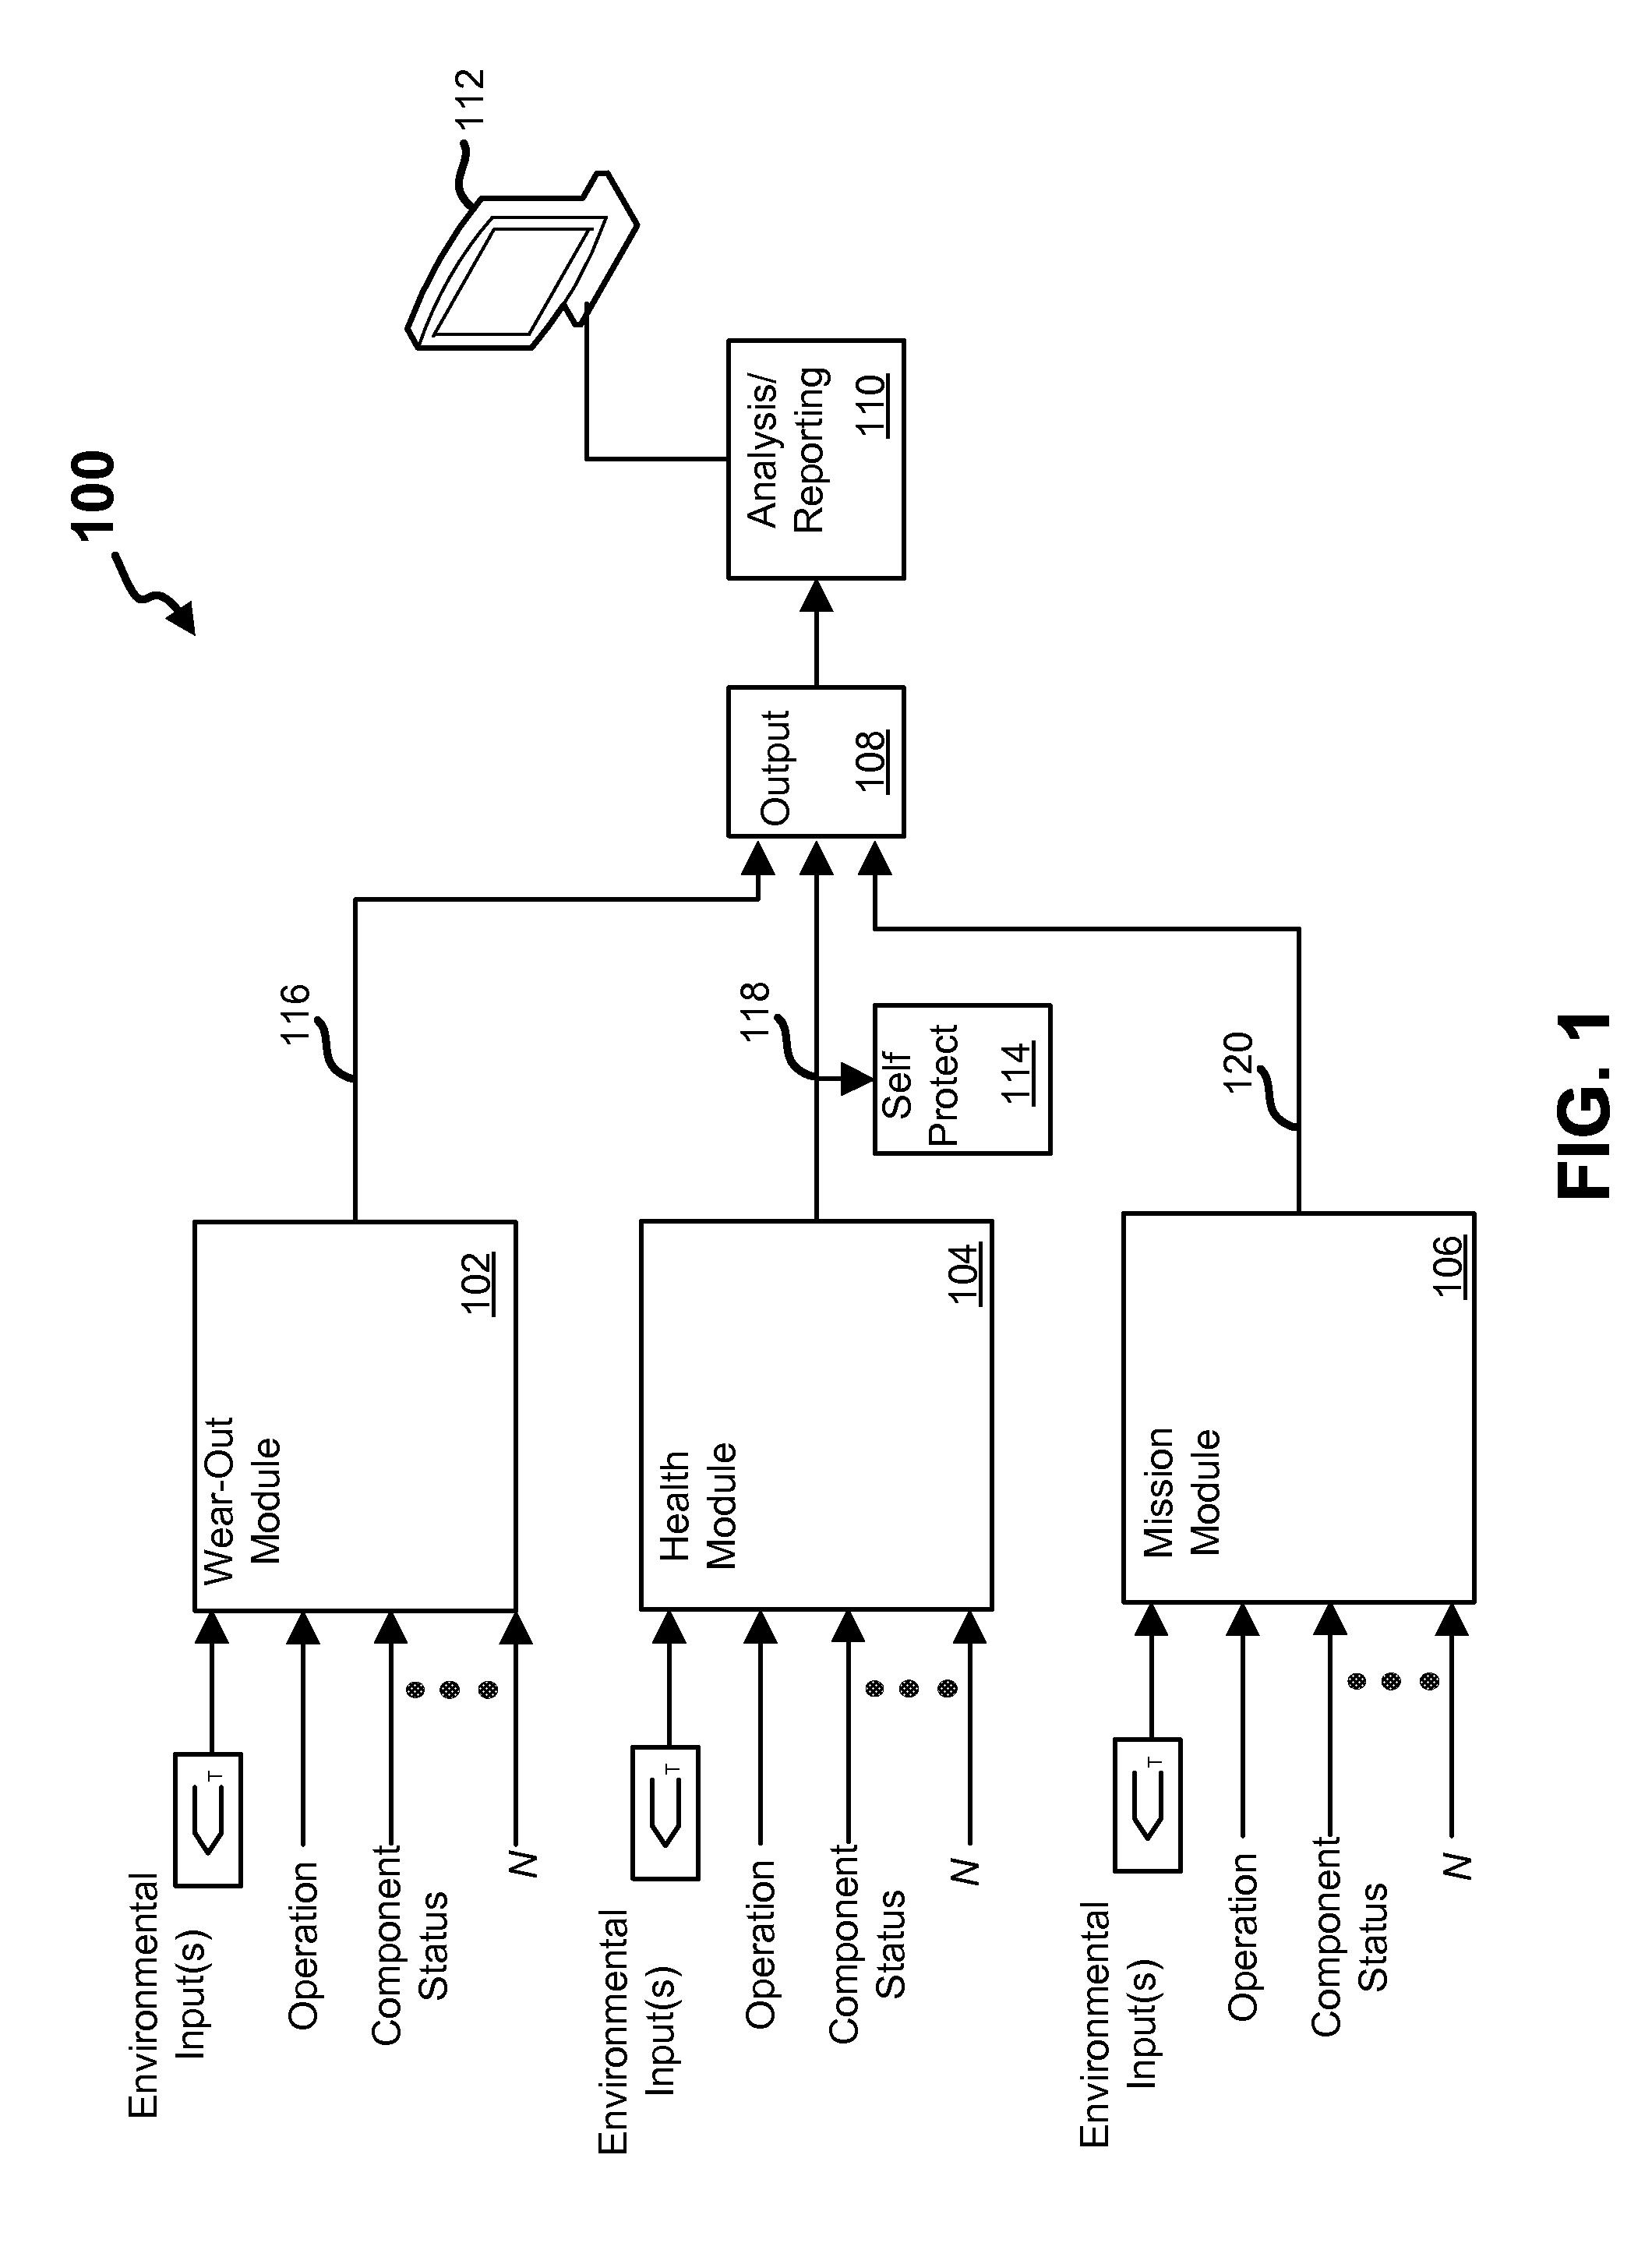 Predictive diagnostics system, apparatus, and method for improved reliability